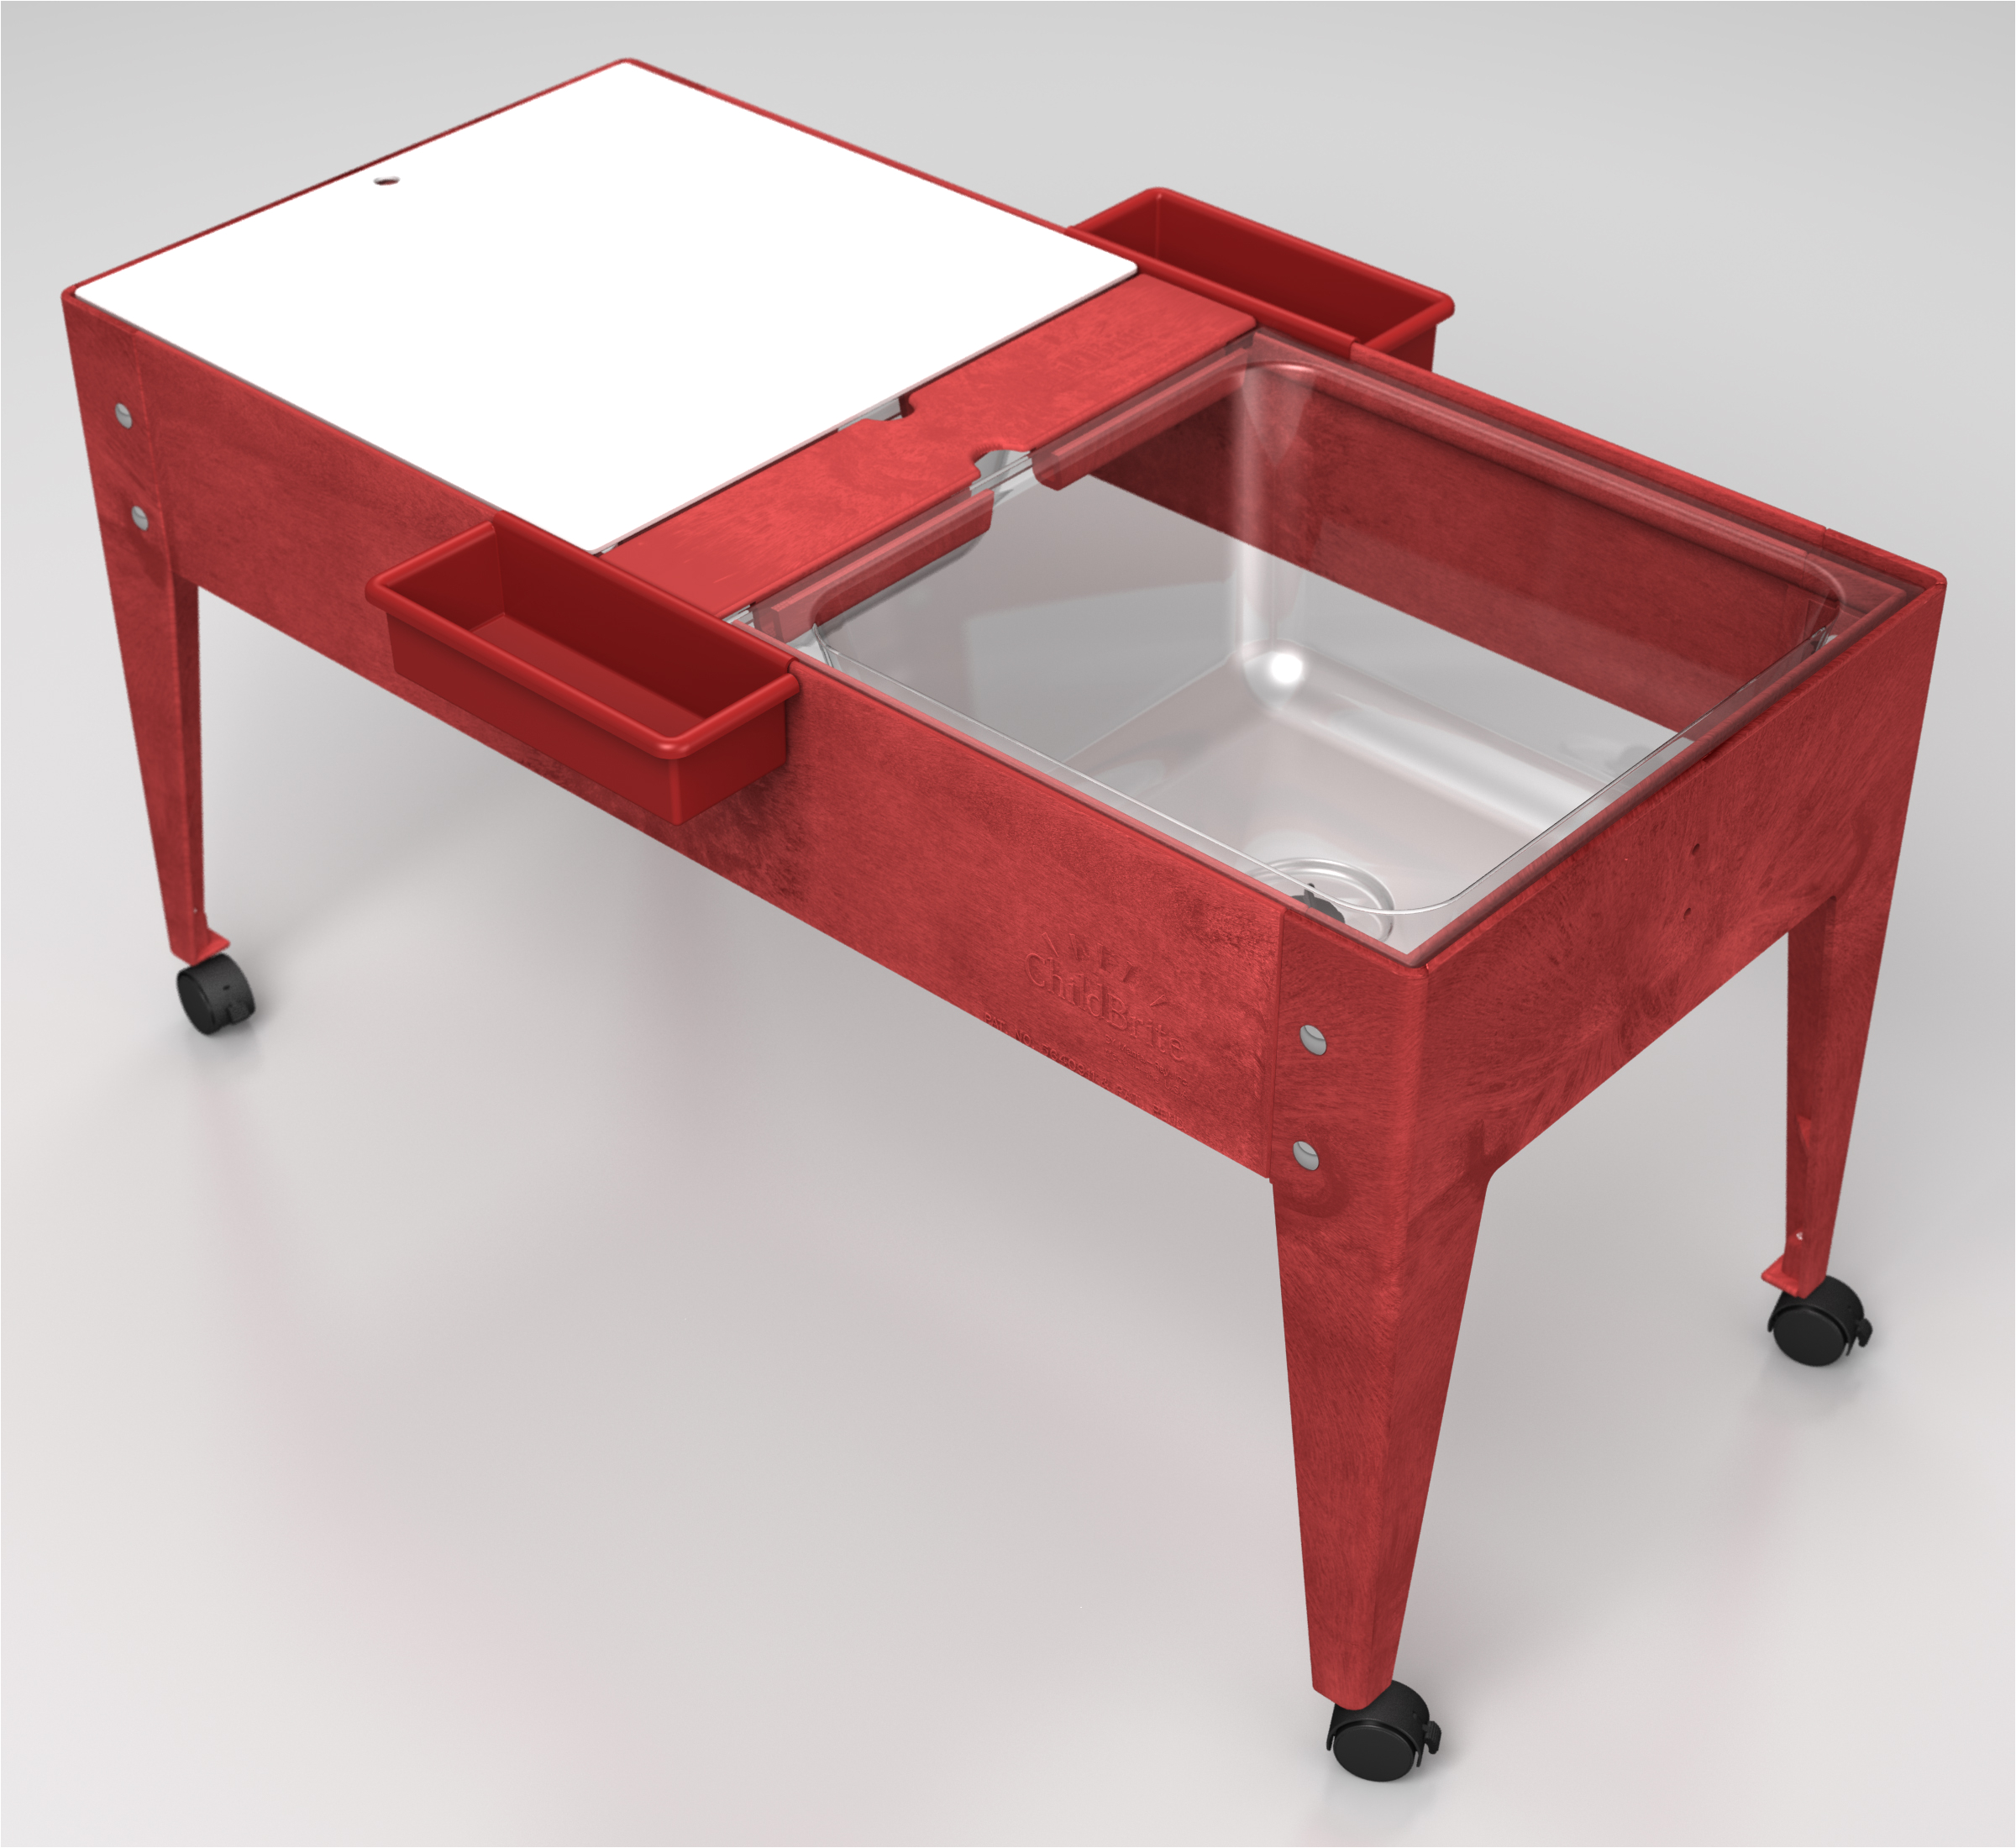 double mite with two 9 inch deep clear tubs red frame 46 l x 21 w x 24 h inch s